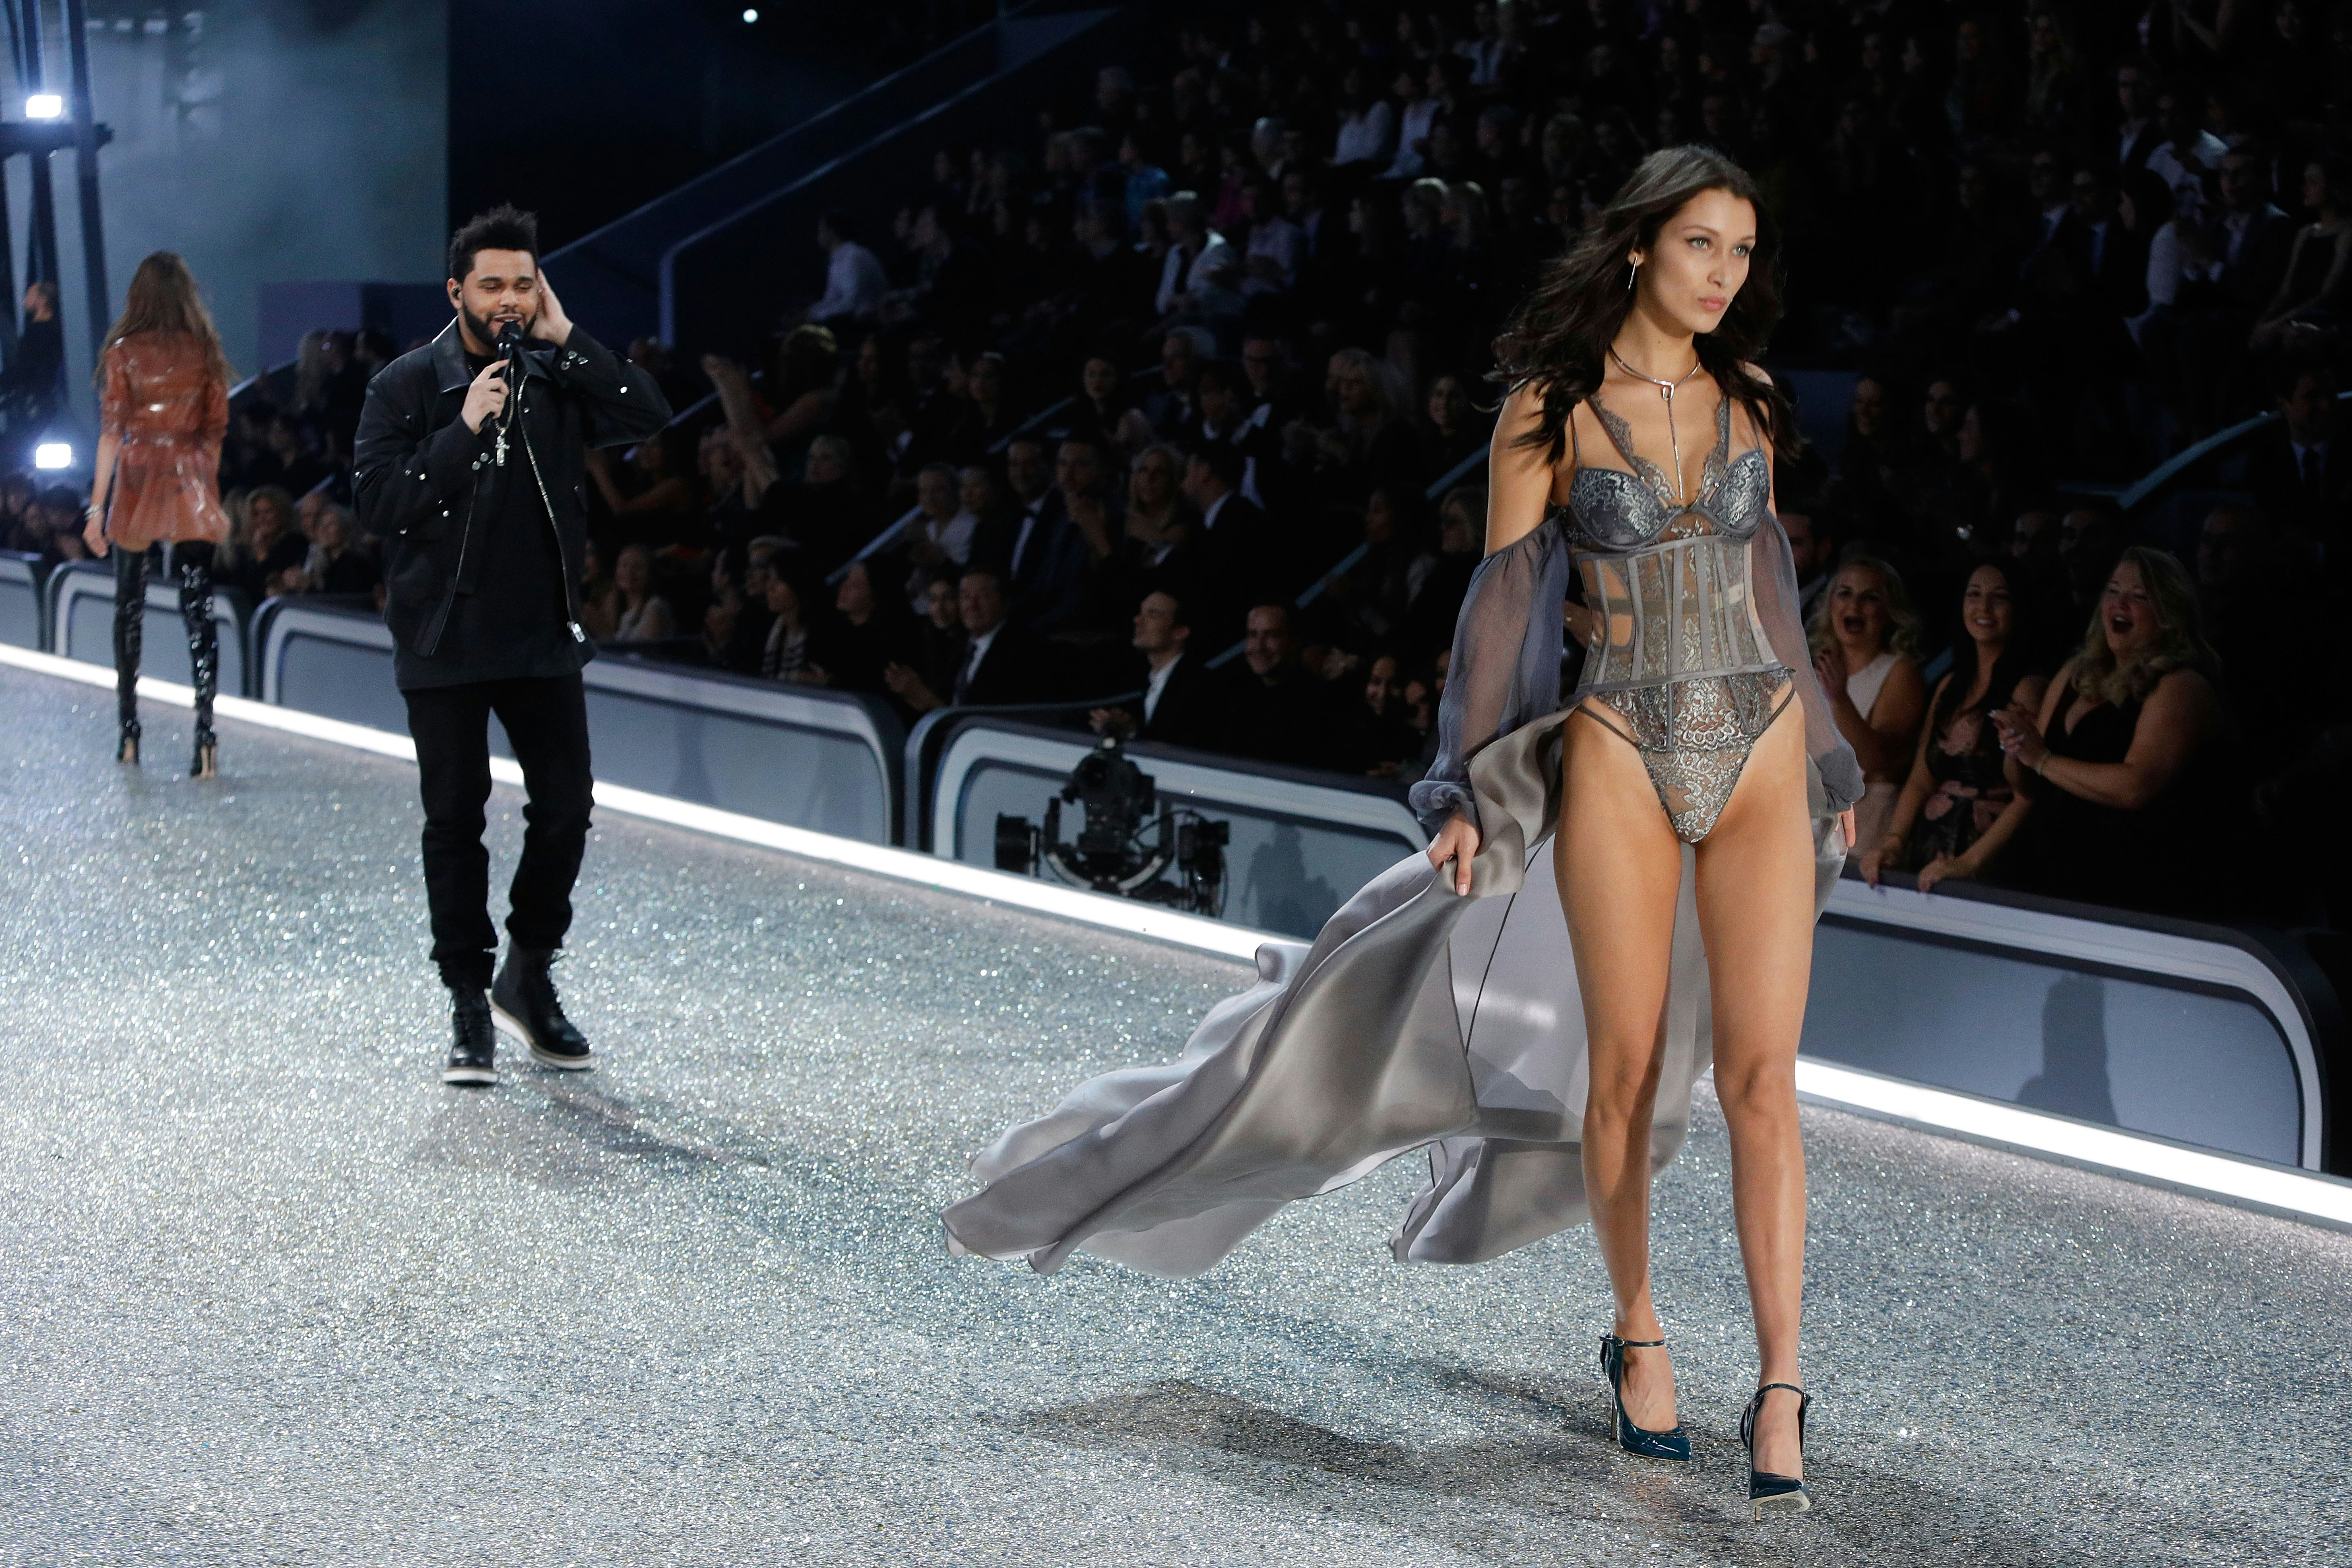 The Funniest Reactions to The Weeknd and Bella Hadid's Runway Run-In